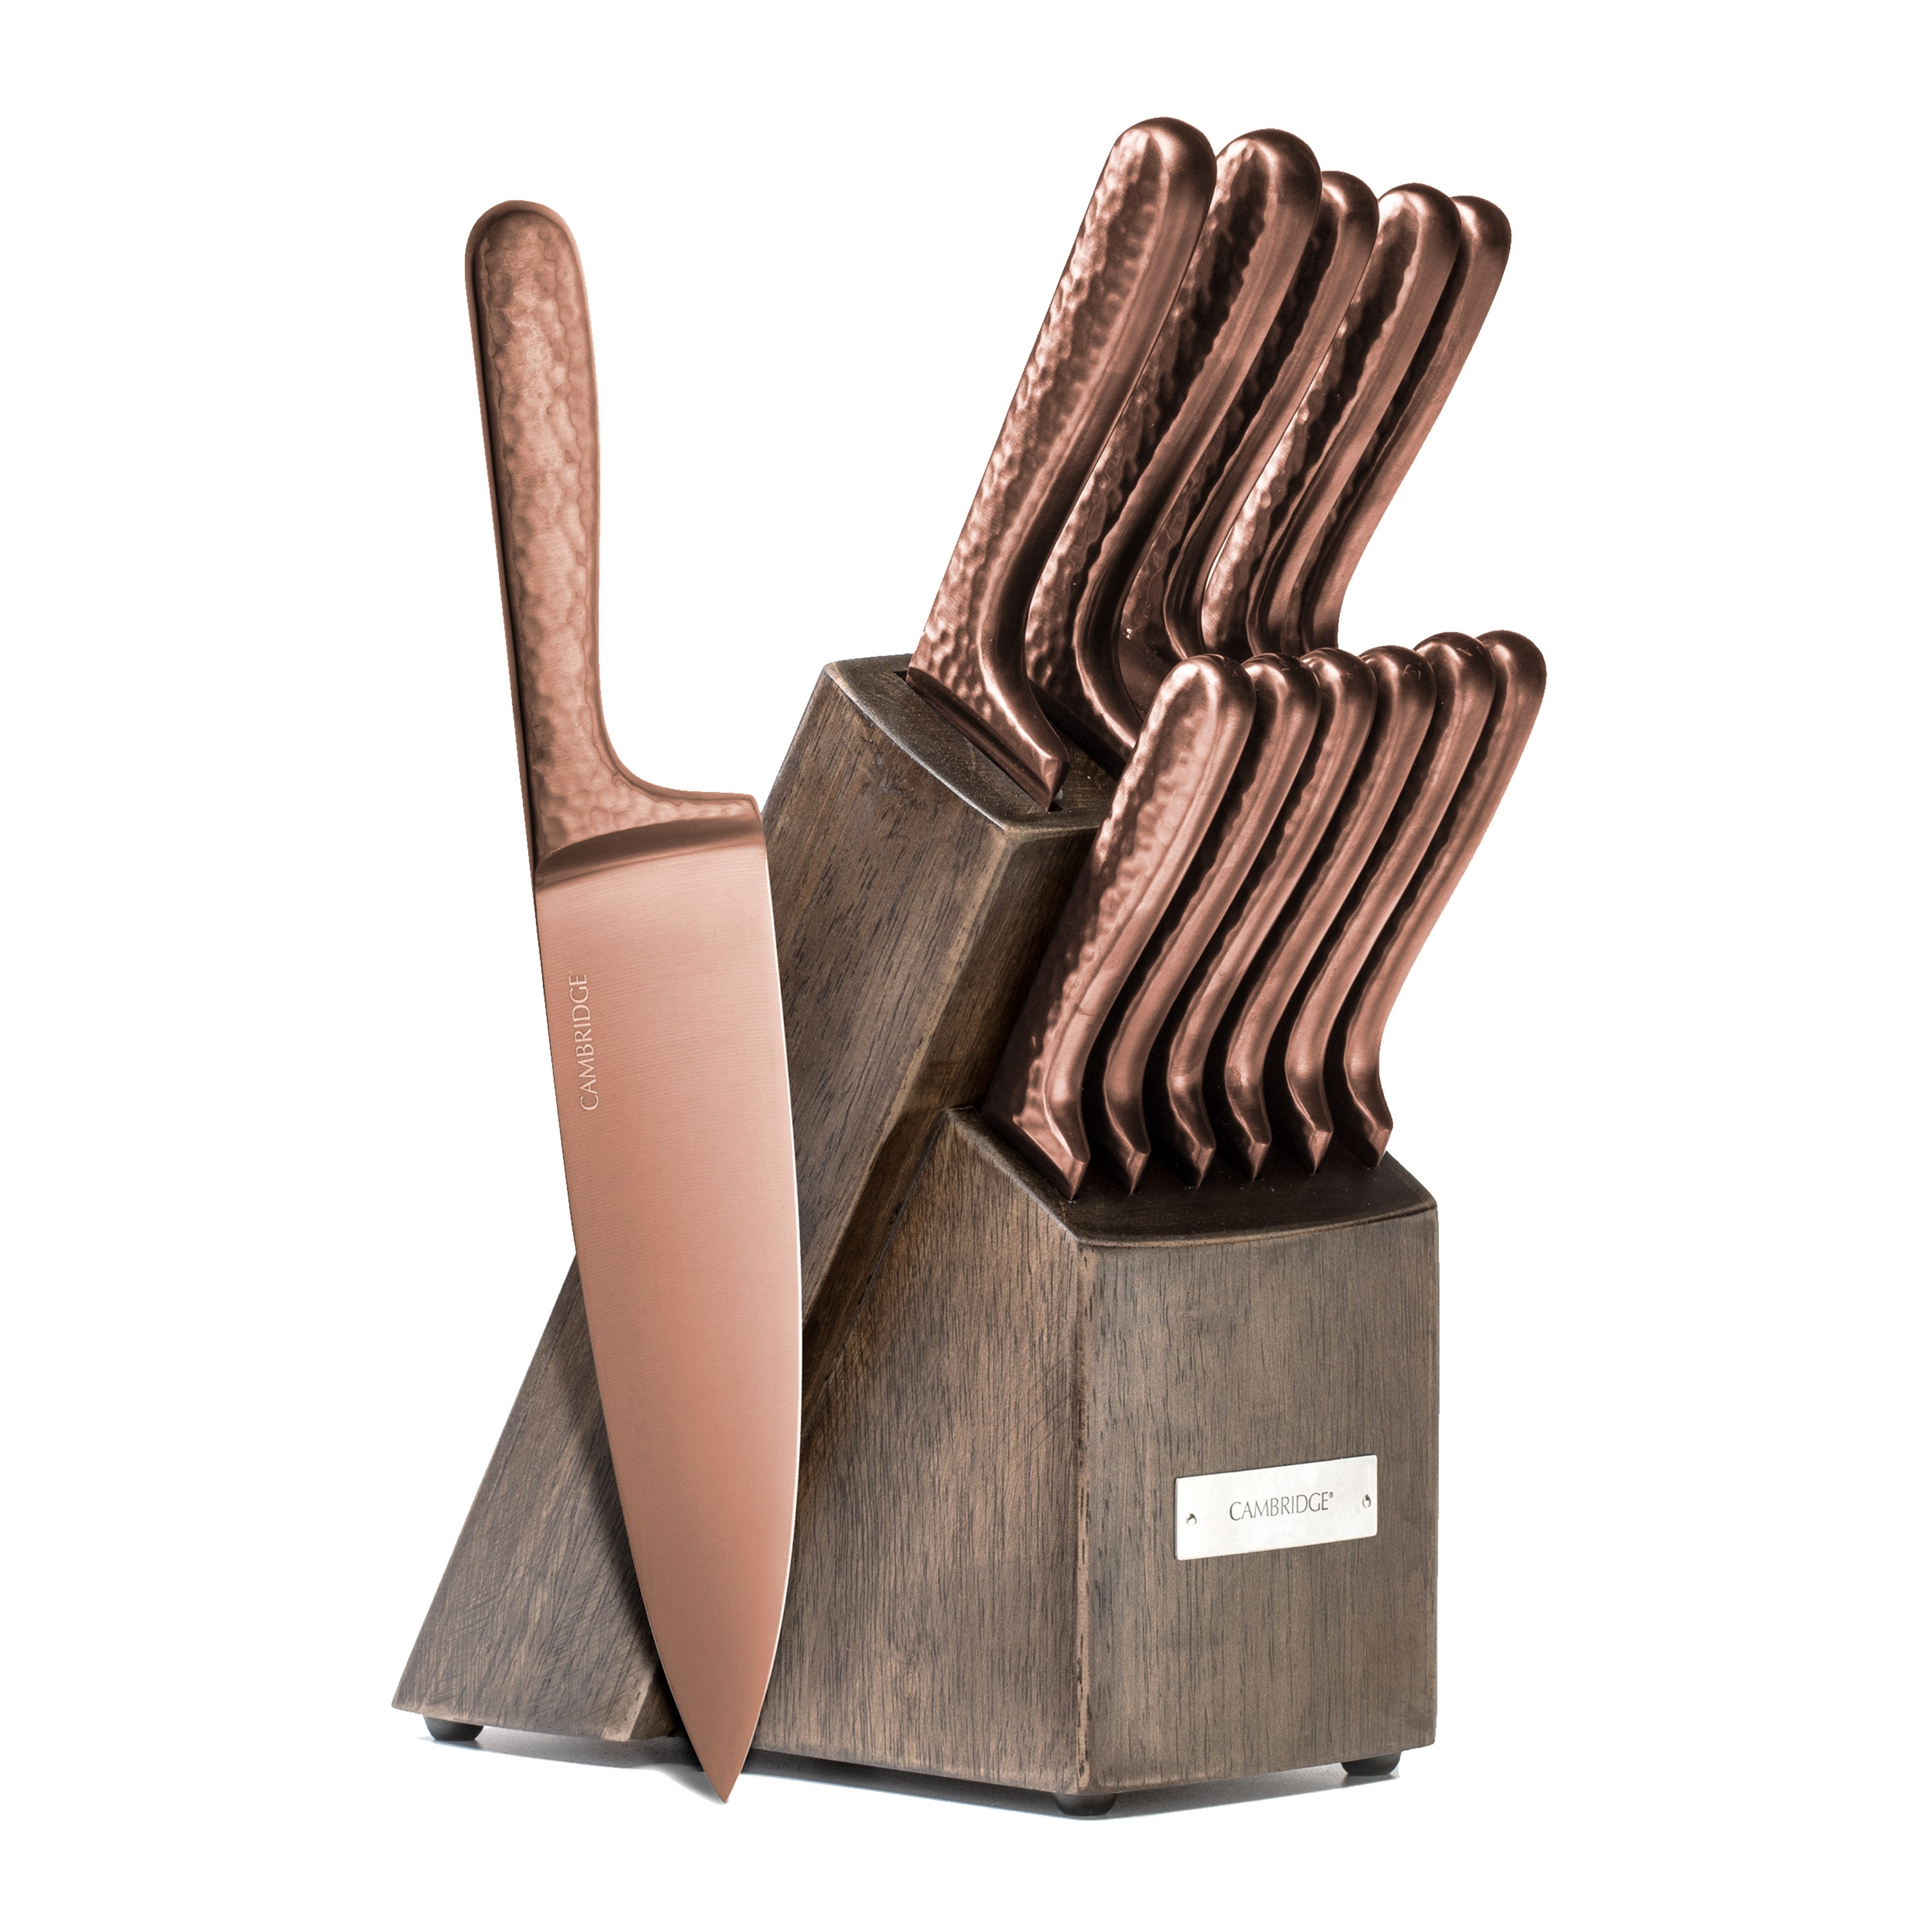 https://ak1.ostkcdn.com/images/products/is/images/direct/ac127339cf76ed7e1e9019d7bc3612f0b1aea2f3/Cambridge-Silversmiths-Rame-Copper-12-Piece-Cutlery-Set-With-Block.jpg